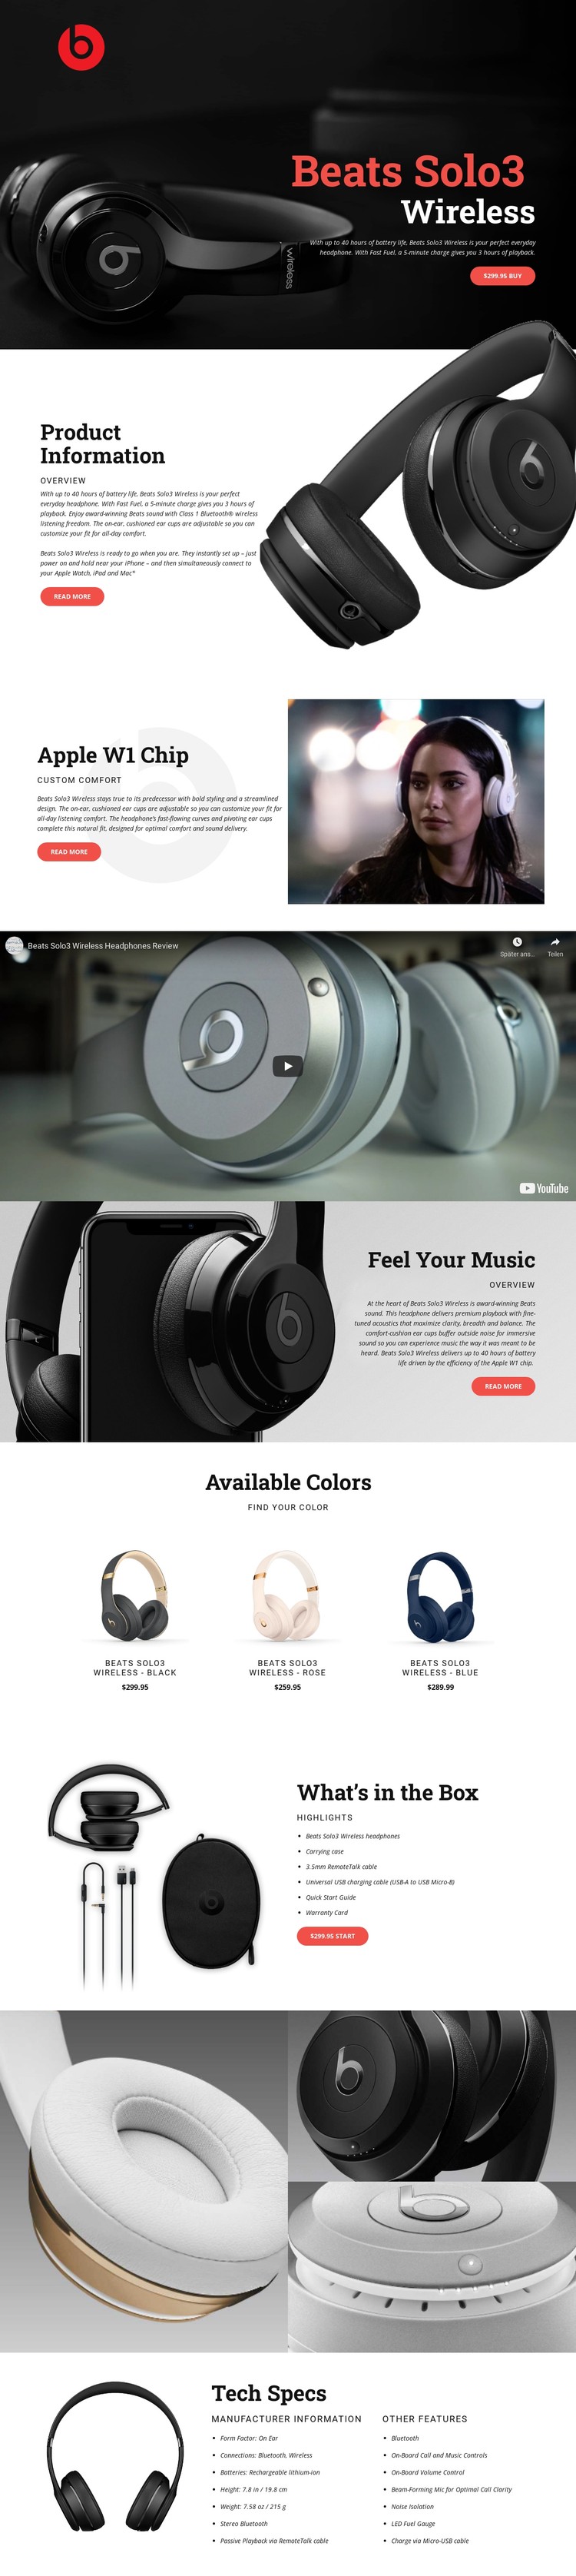 Outstanding quality of music CSS Template